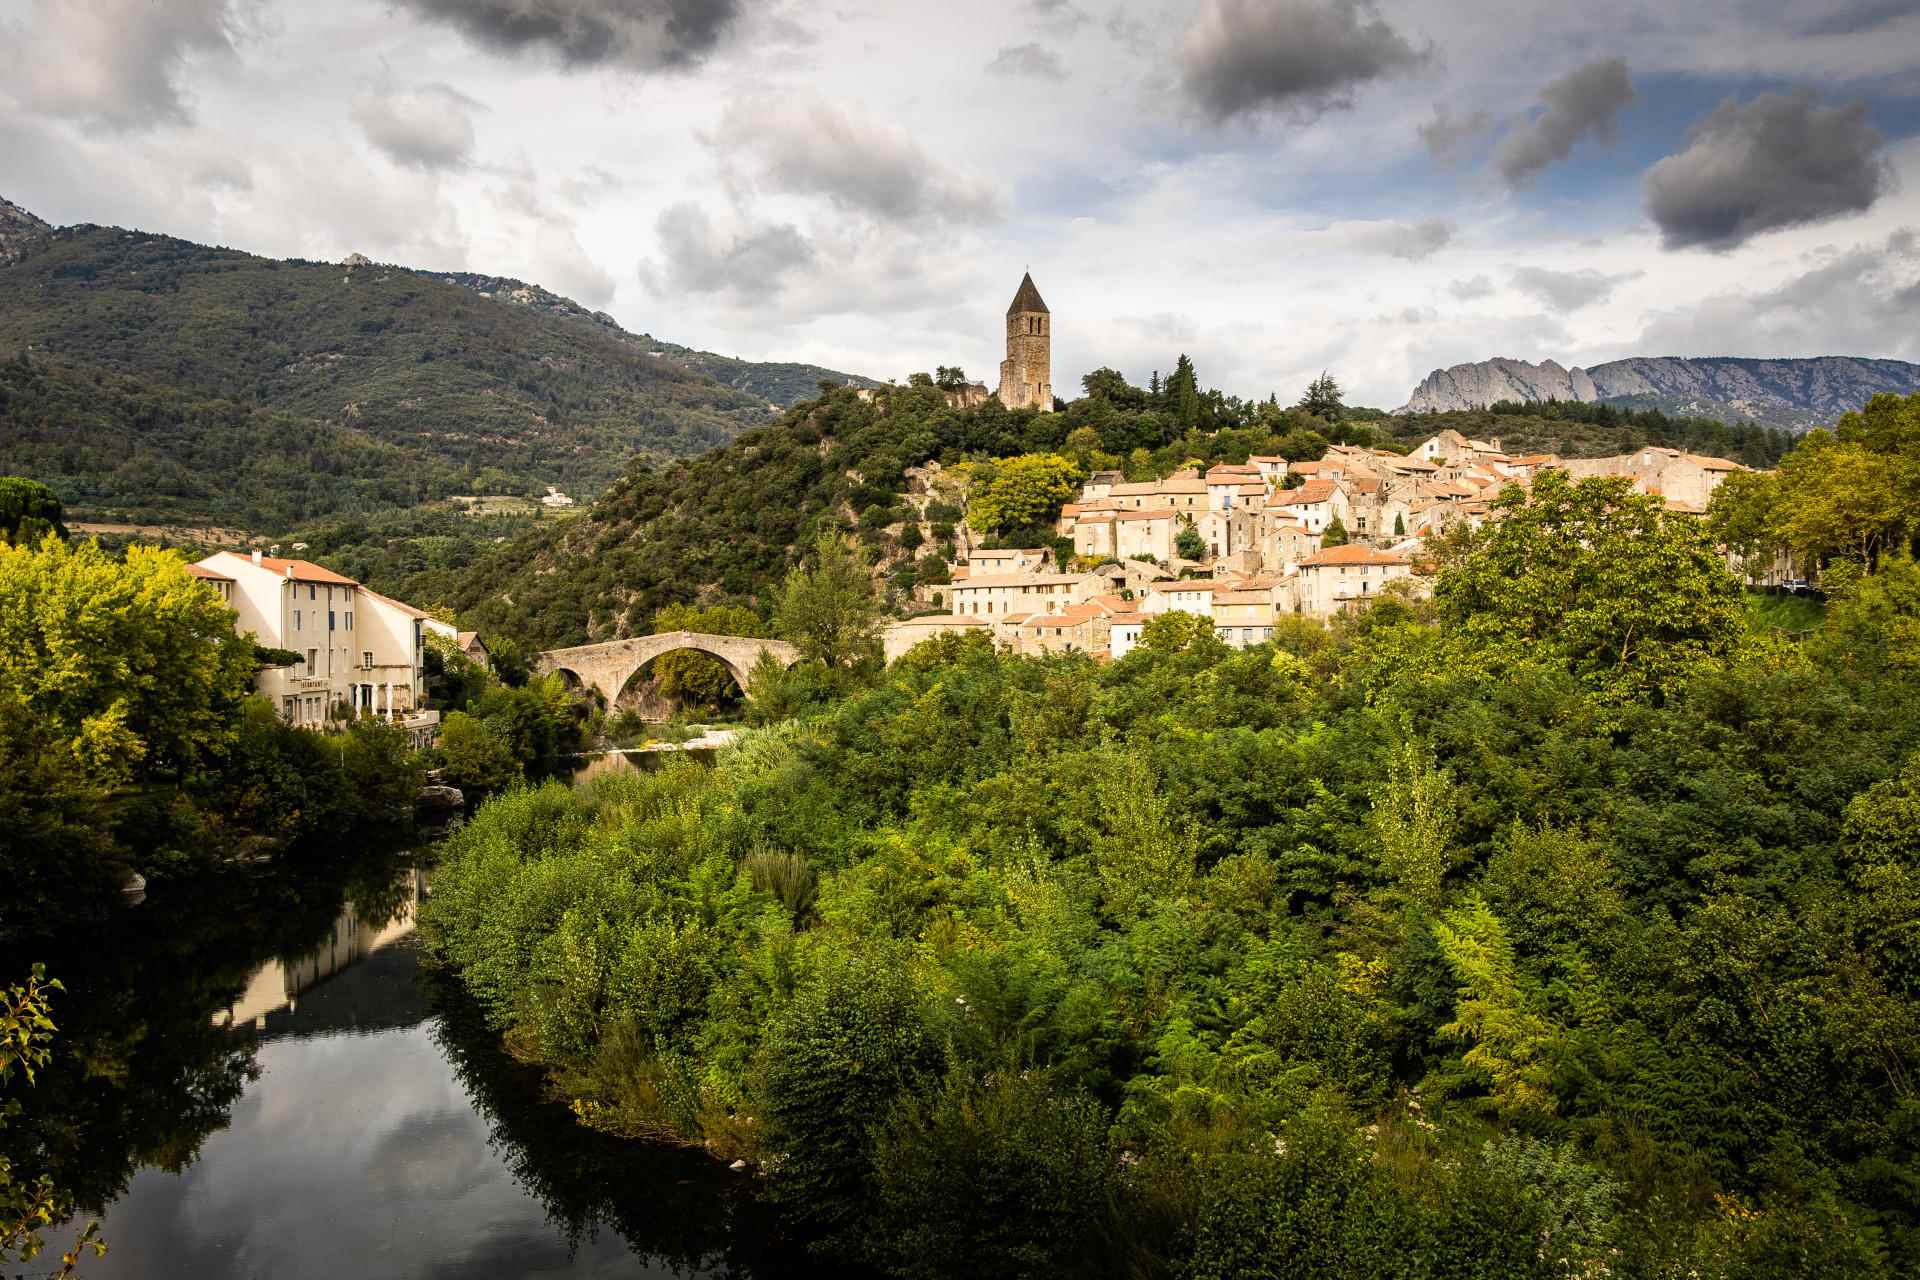 The medieval town of Olargues is listed as one of the 